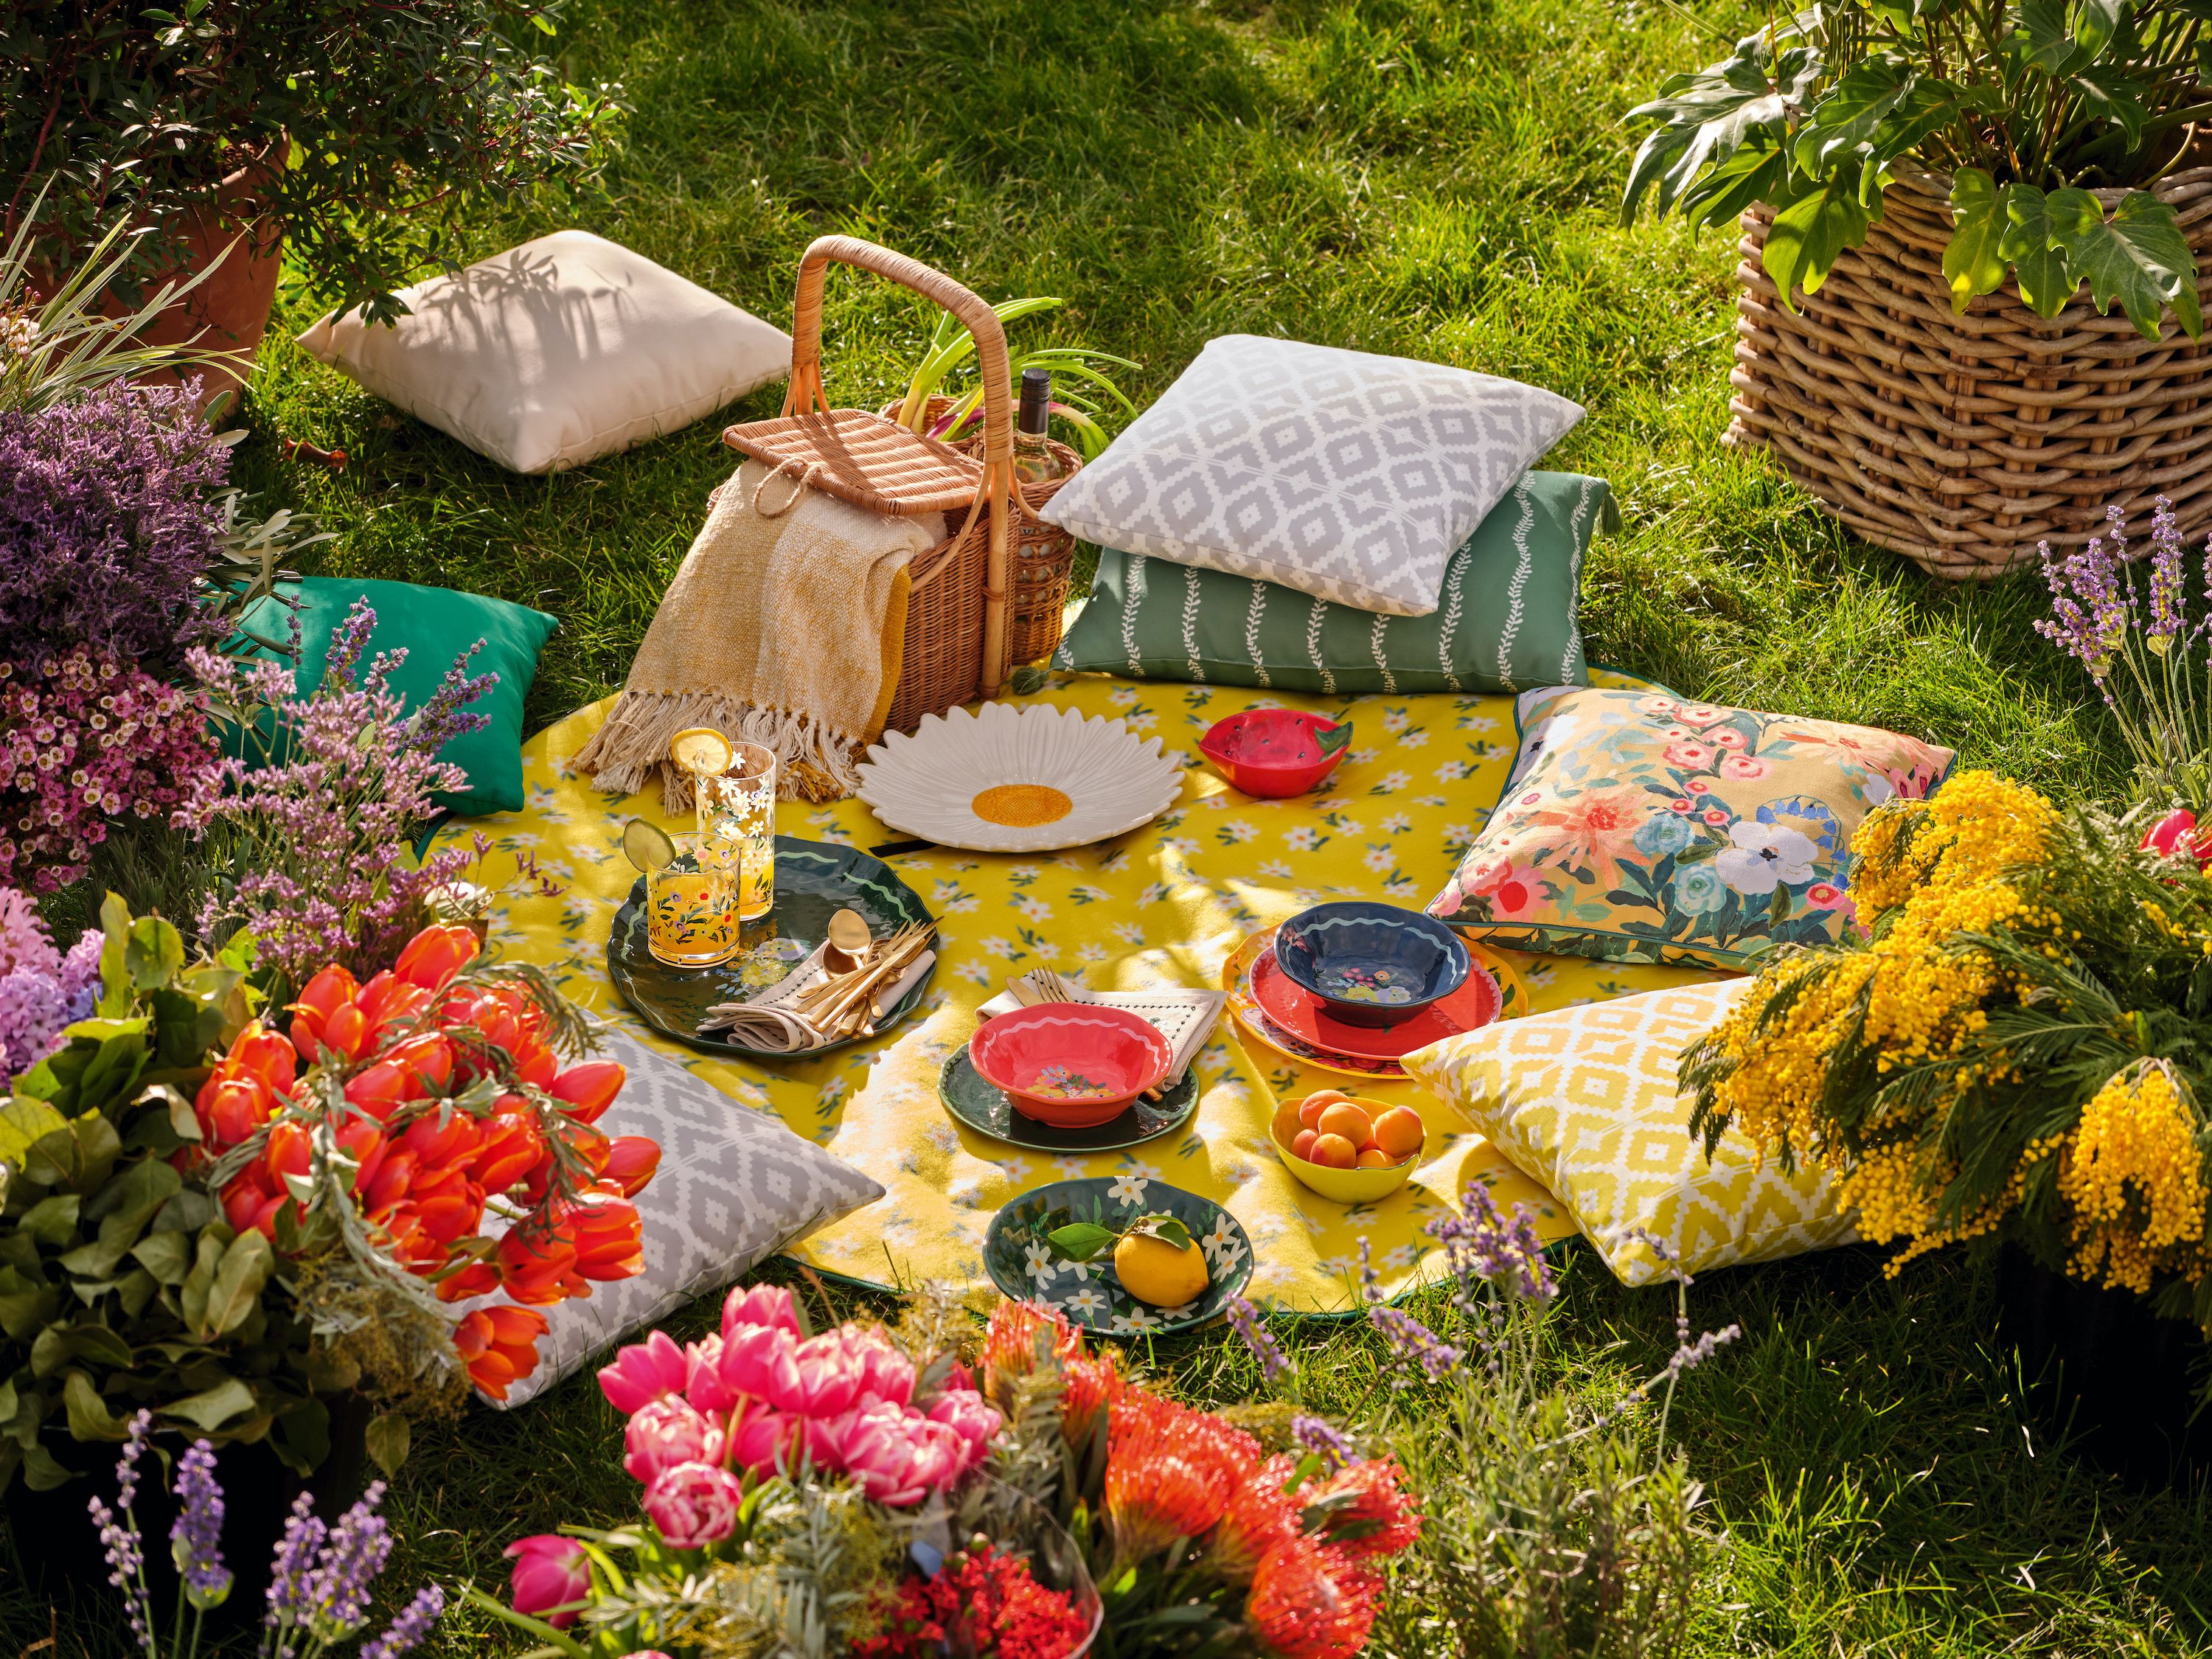 25 stylish picnic sets and accessories for outdoor dining